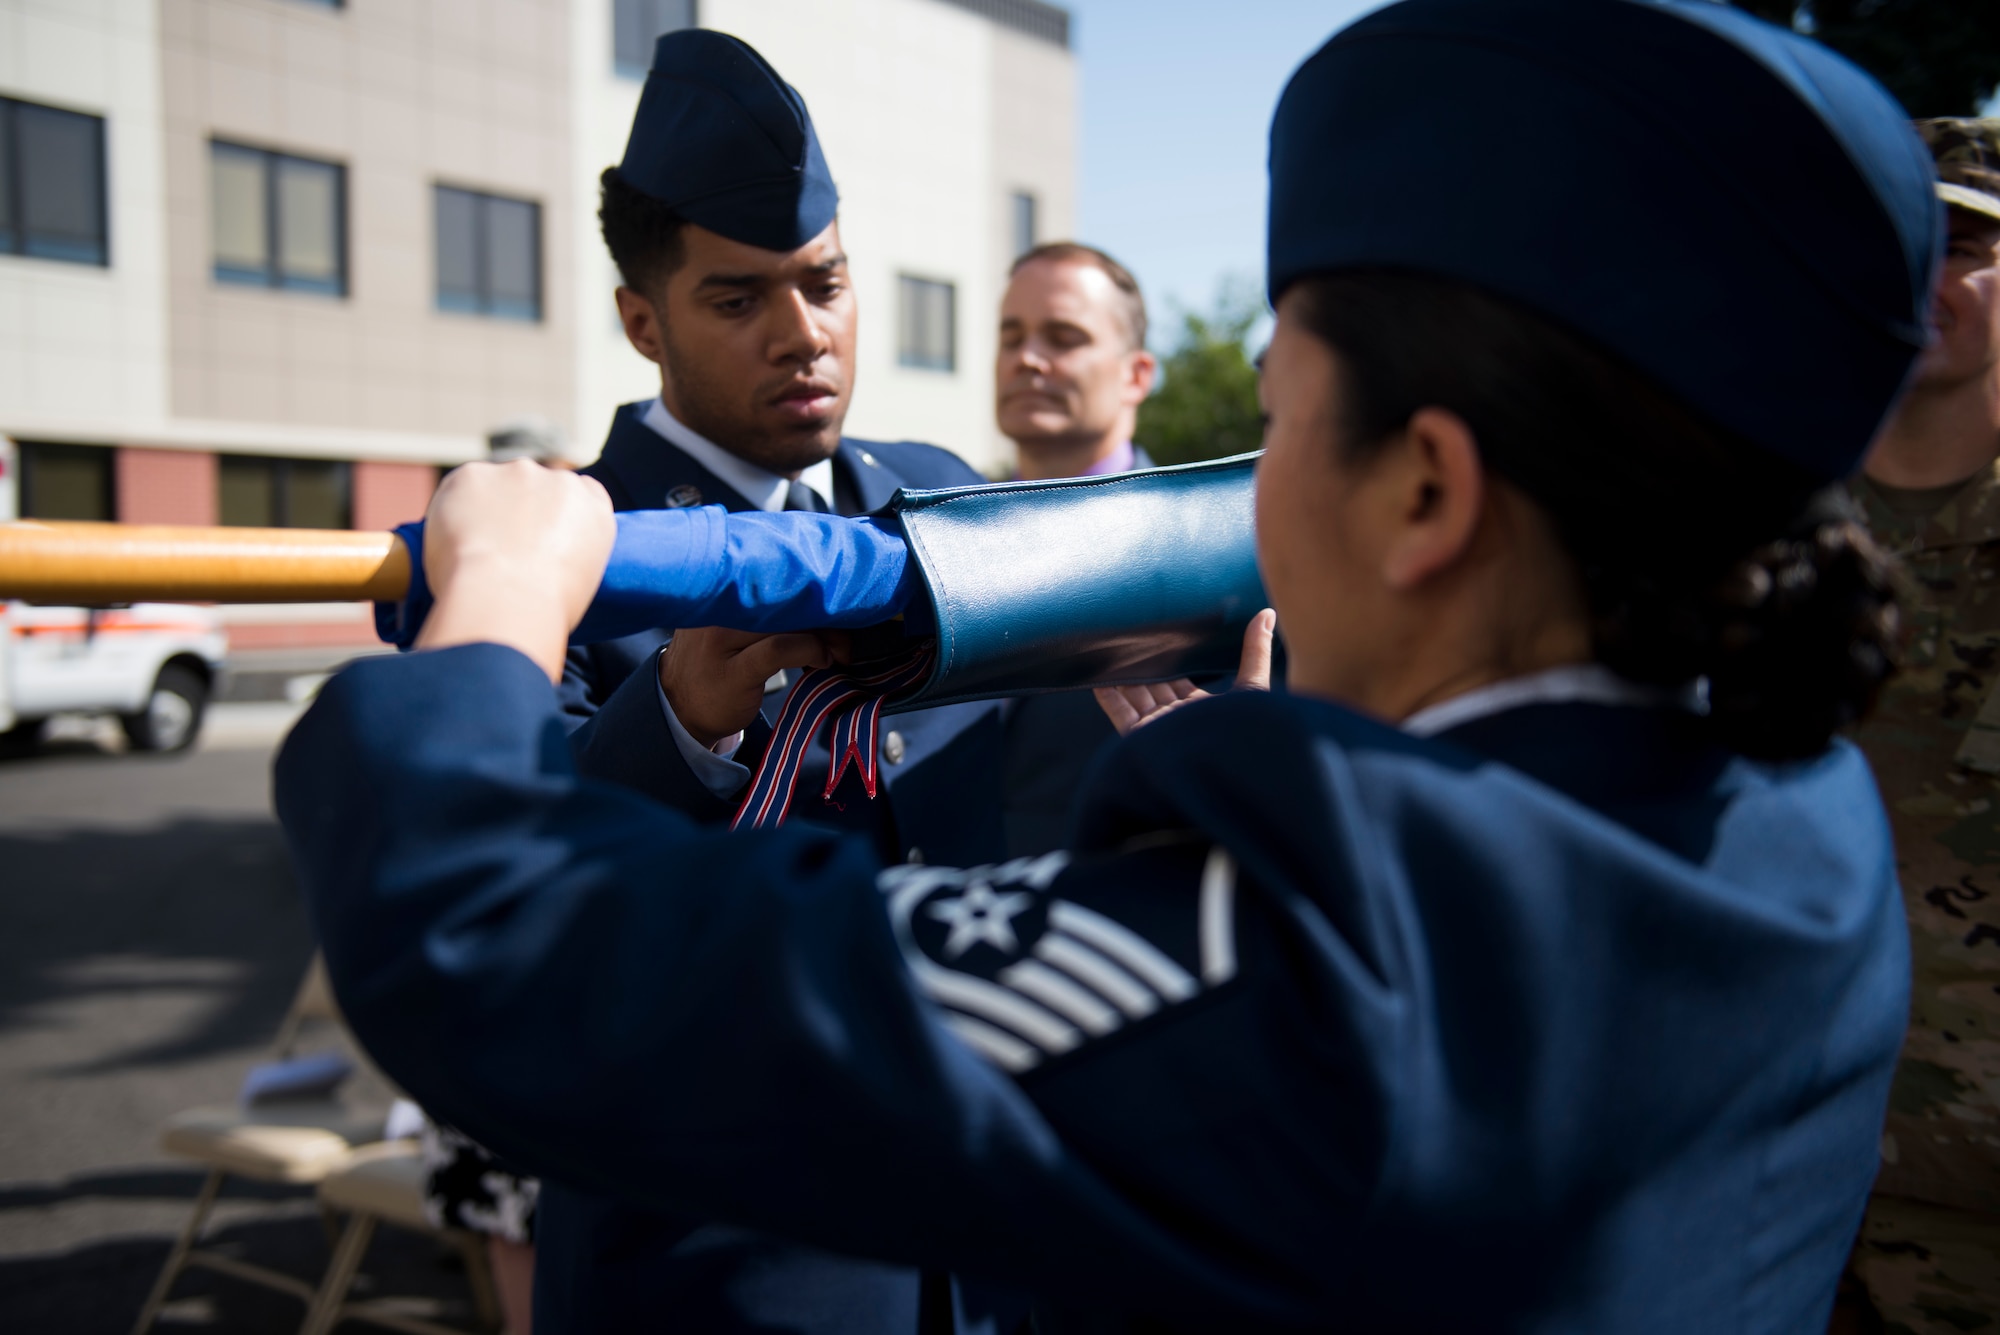 U.S. Air Force Master Sgt. Brittany Zavala, 92nd Health Care Operations Squadron superintendent, covers the 92nd Medical Operations Squadron?? guidon as part of the 92nd Medical Group re-designation ceremony at Fairchild Air Force Base, Washington, July 19, 2019. The 92nd MDG initiated the first phase of its re-designation program by hosting a ceremony renaming the 92nd AMDS  to the 92nd Operational Medical Readiness Squadron and the 92nd Medical Operations Squadron to the 92nd Health Care Operations Squadron. (U.S. Air Force photo by Airman 1st Class Lawrence Sena)